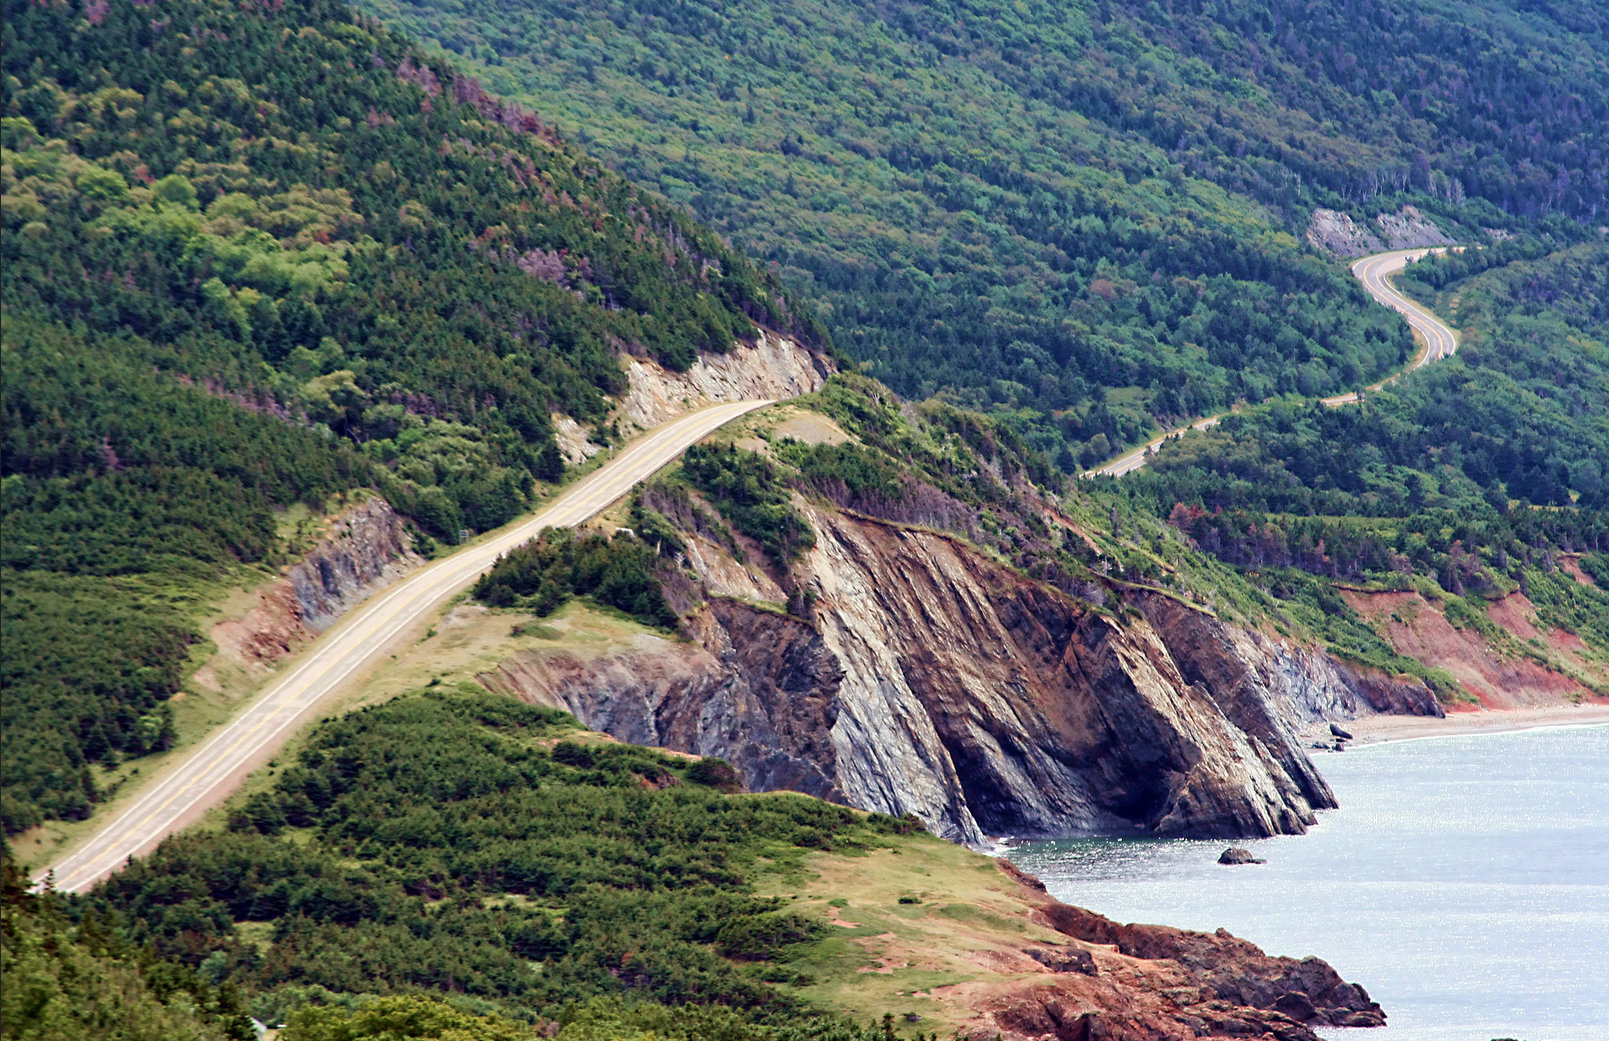 Home of the Cabot Trail